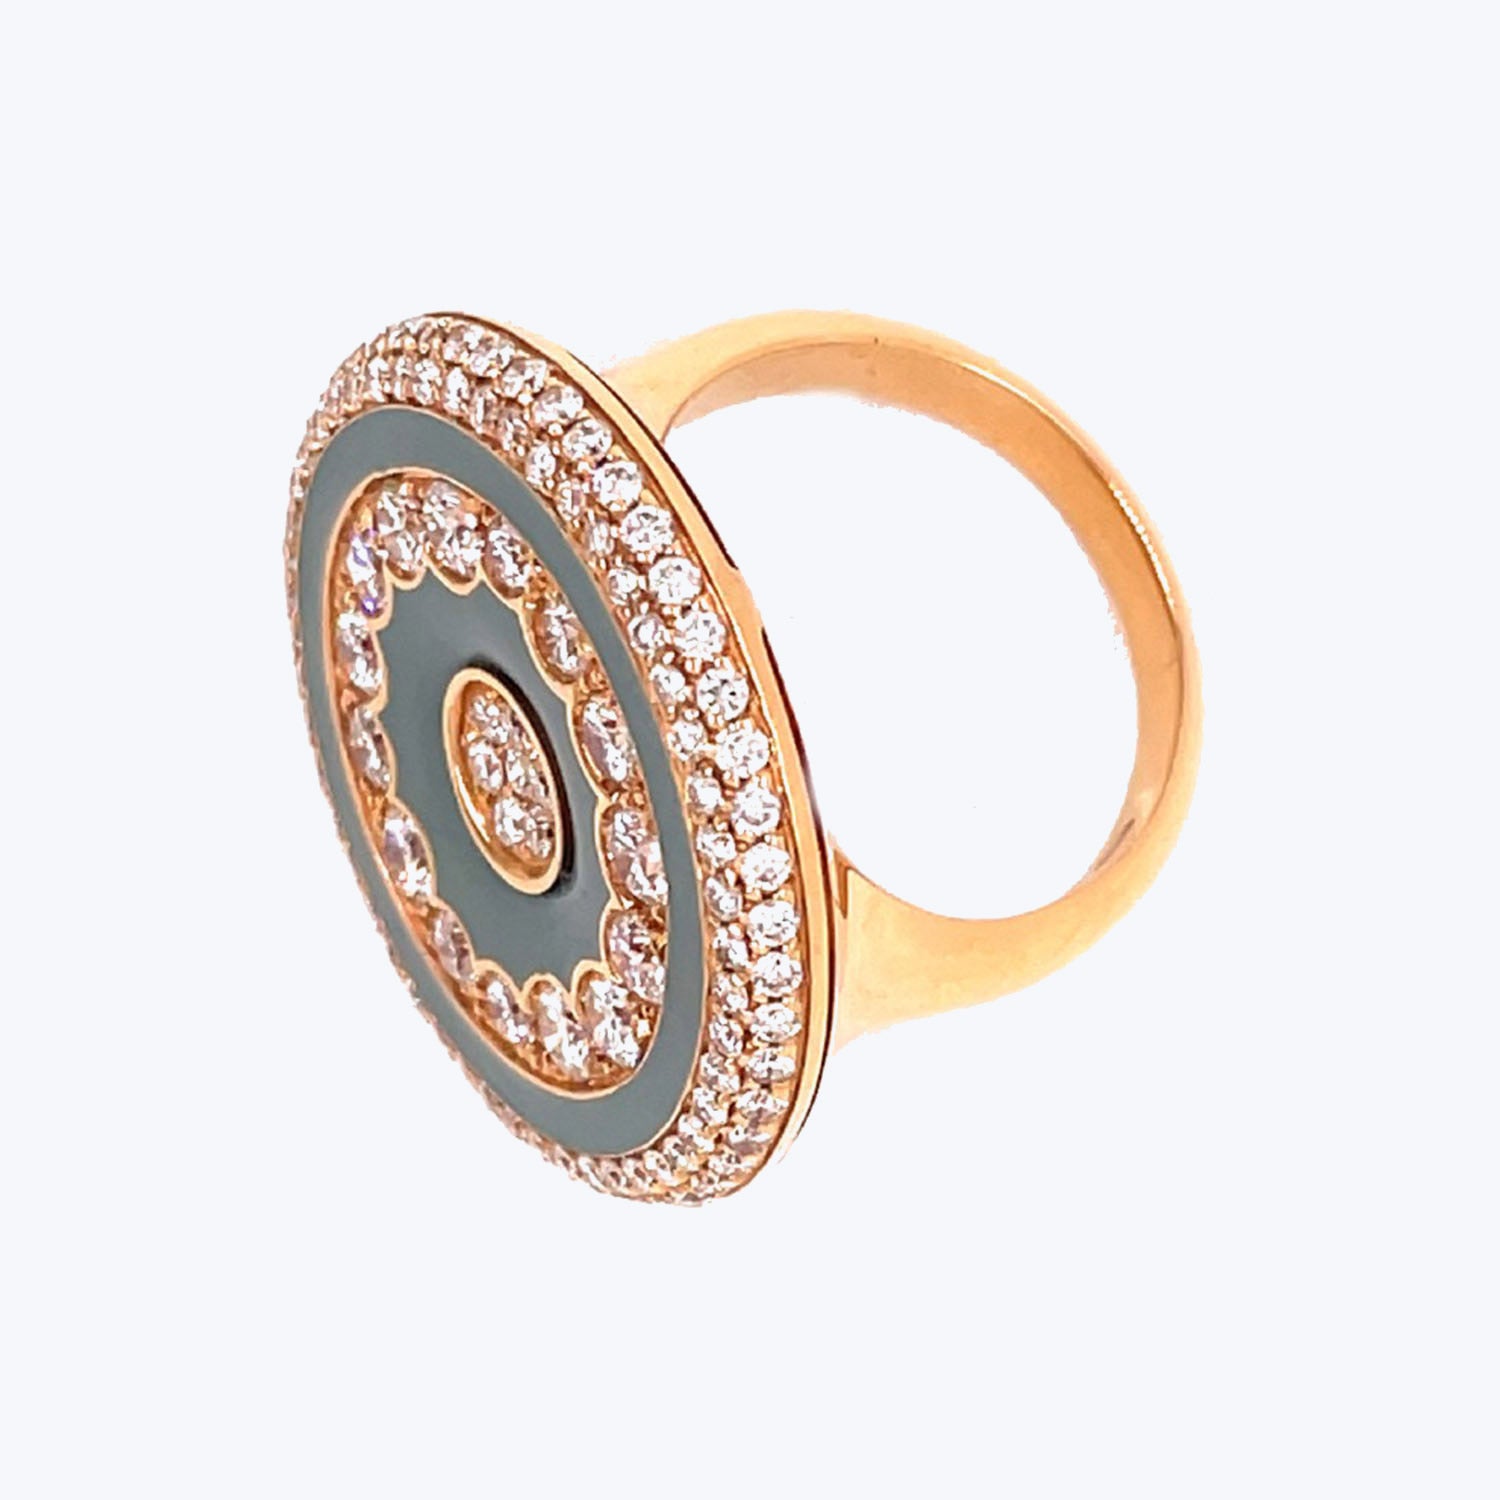 Exquisite vintage-style ring with sparkling crystals and intricate gold detail.